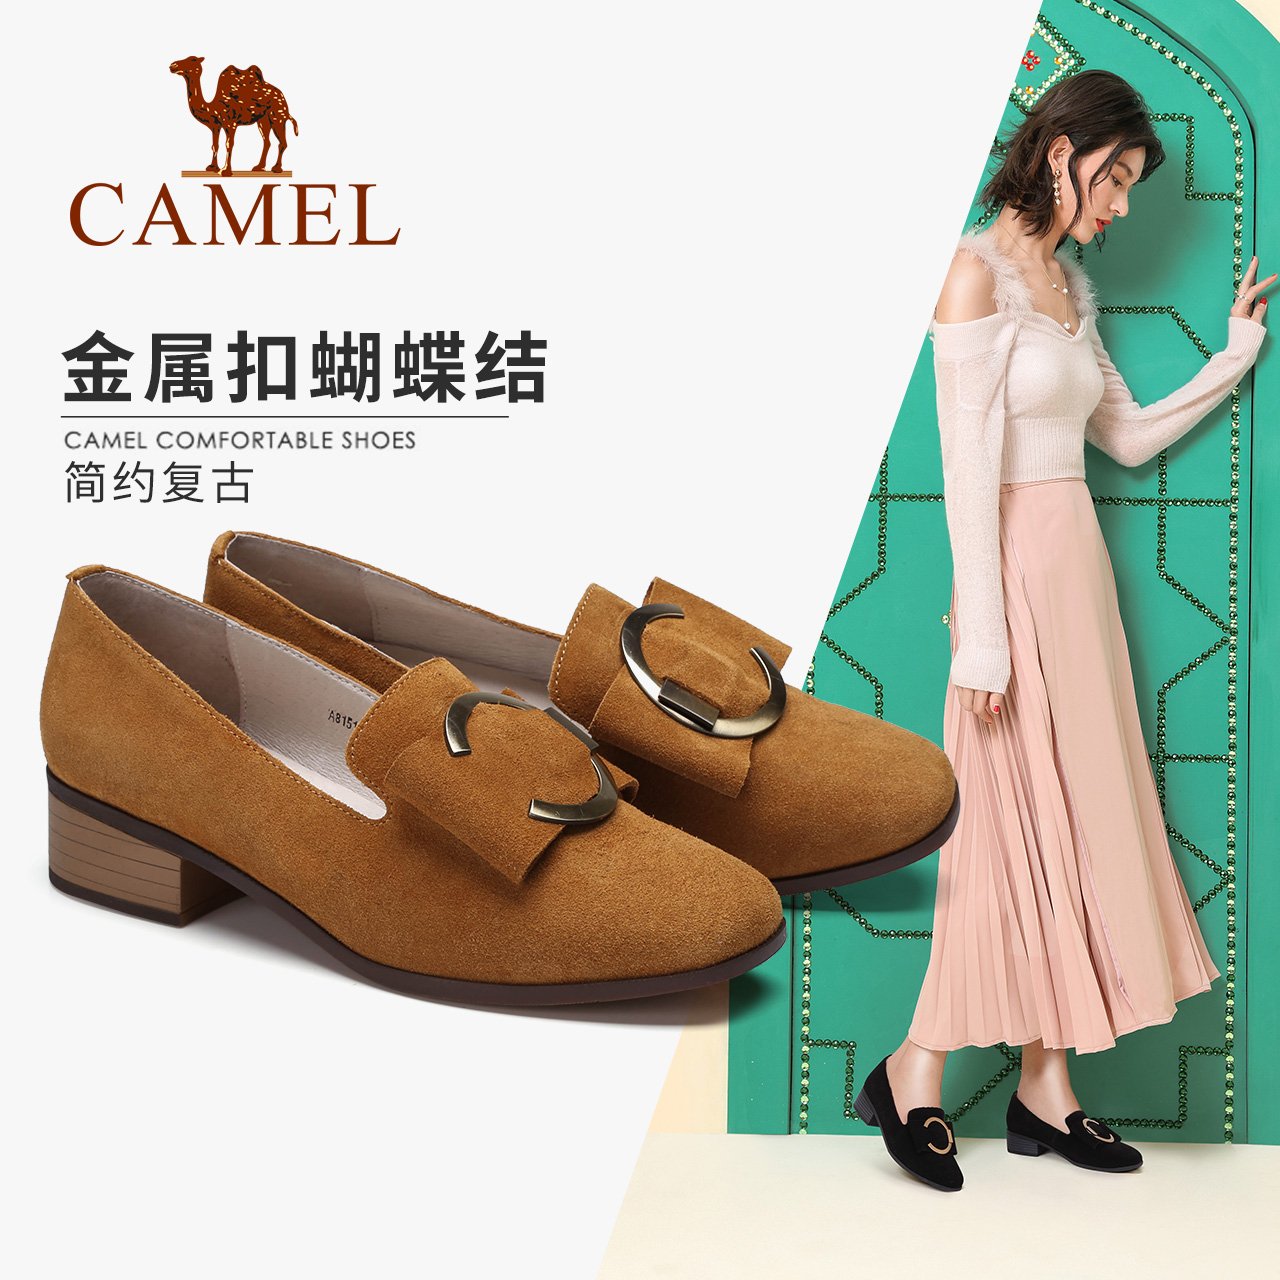 Camel / camel women's shoes 2018 early autumn new low-heeled shallow mouth single shoes female round head flat shoes fashion wild